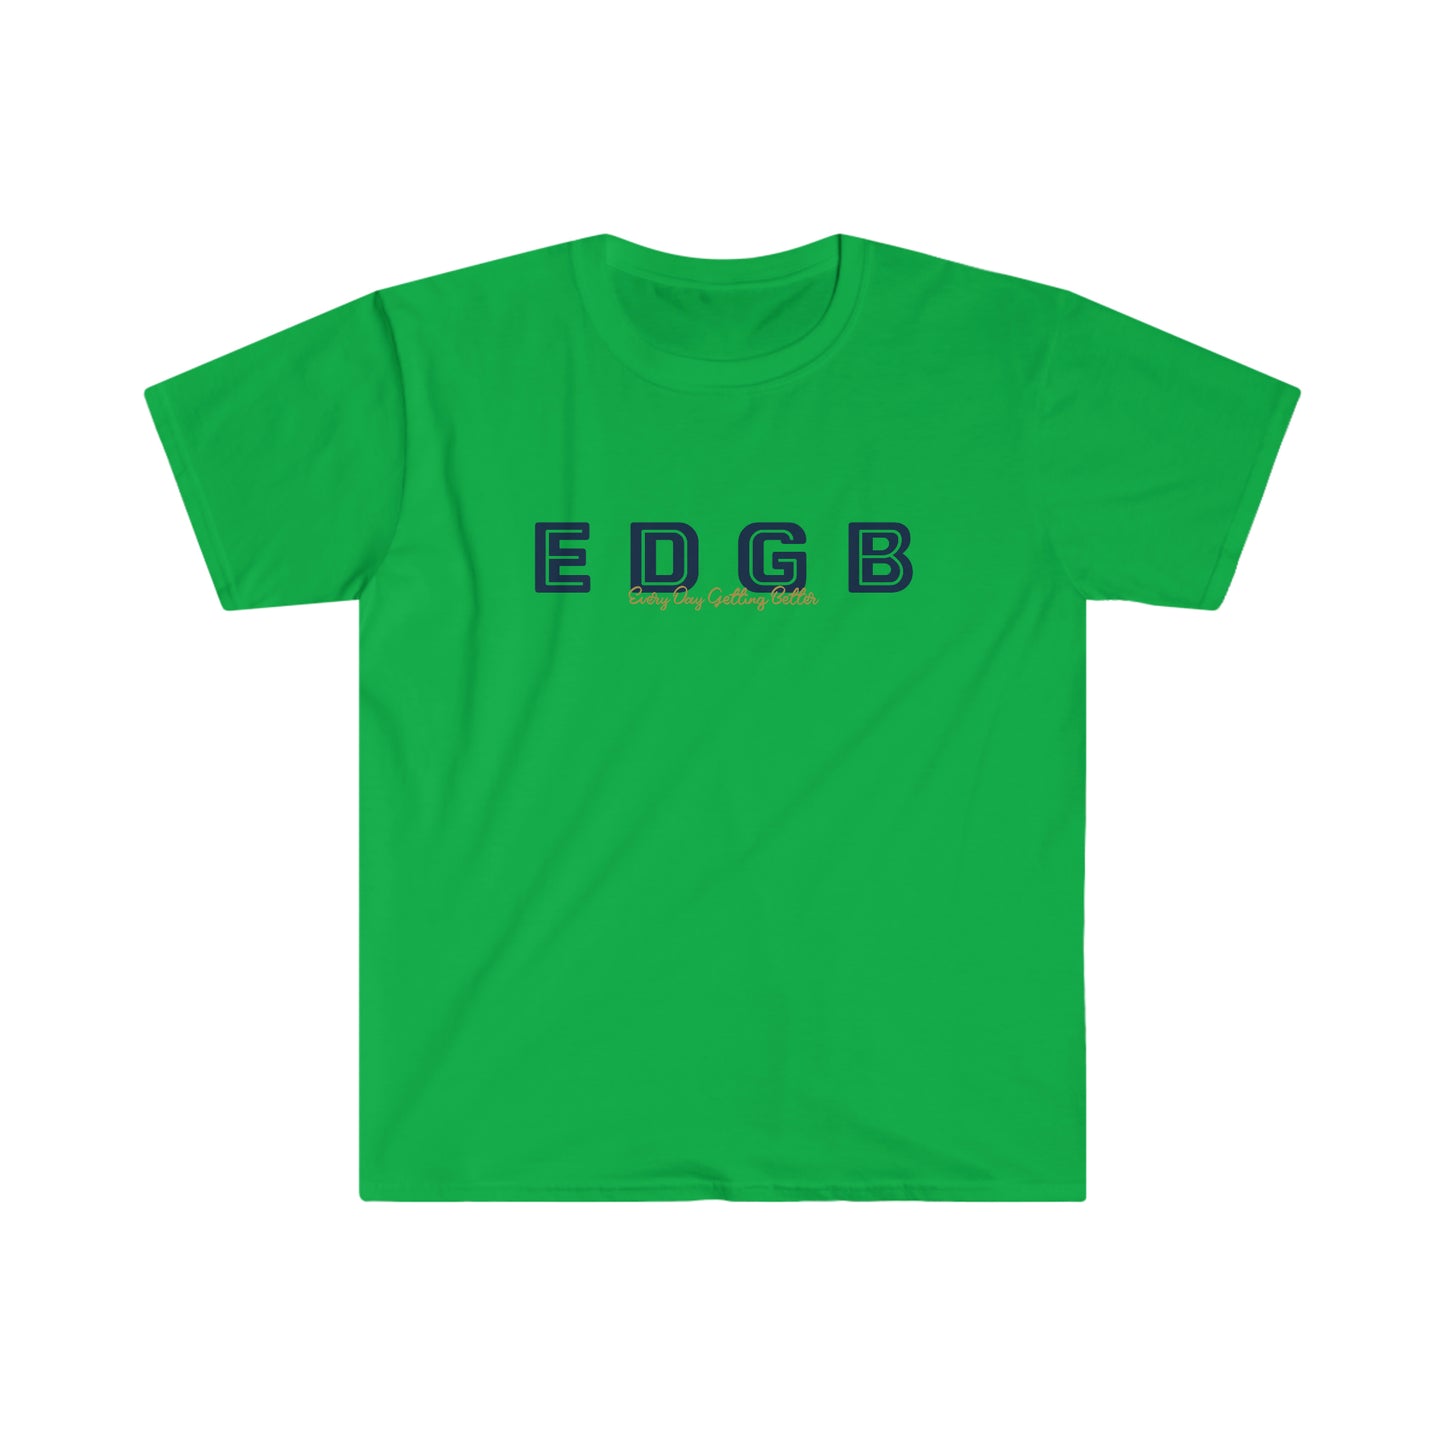 Every Day Getting Better - EDGB - Wakefield T-Shirt